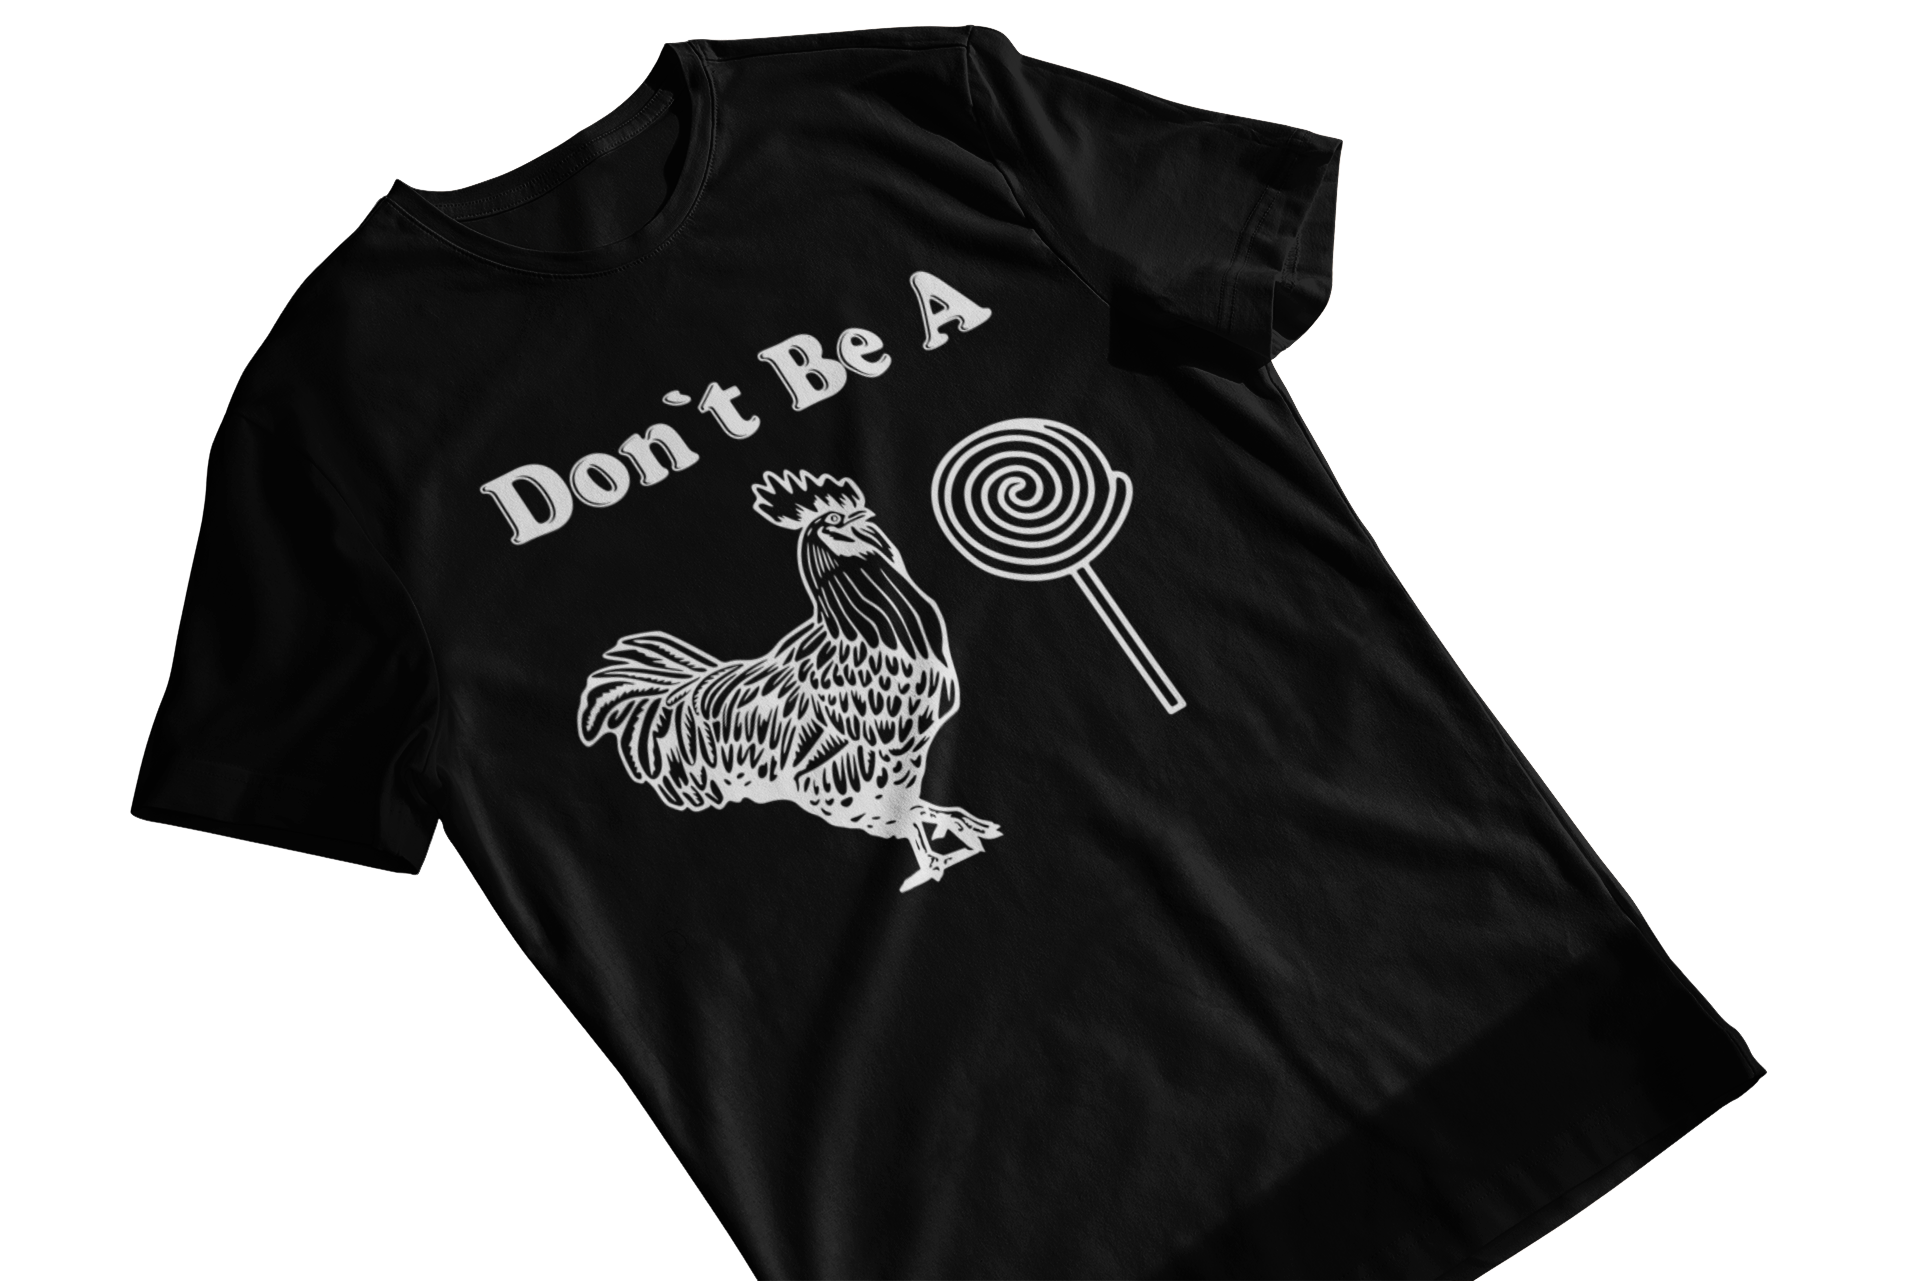 Funny black t-shirt for men with a combination of a rooster and lollipop graphic, complete with a humorous message